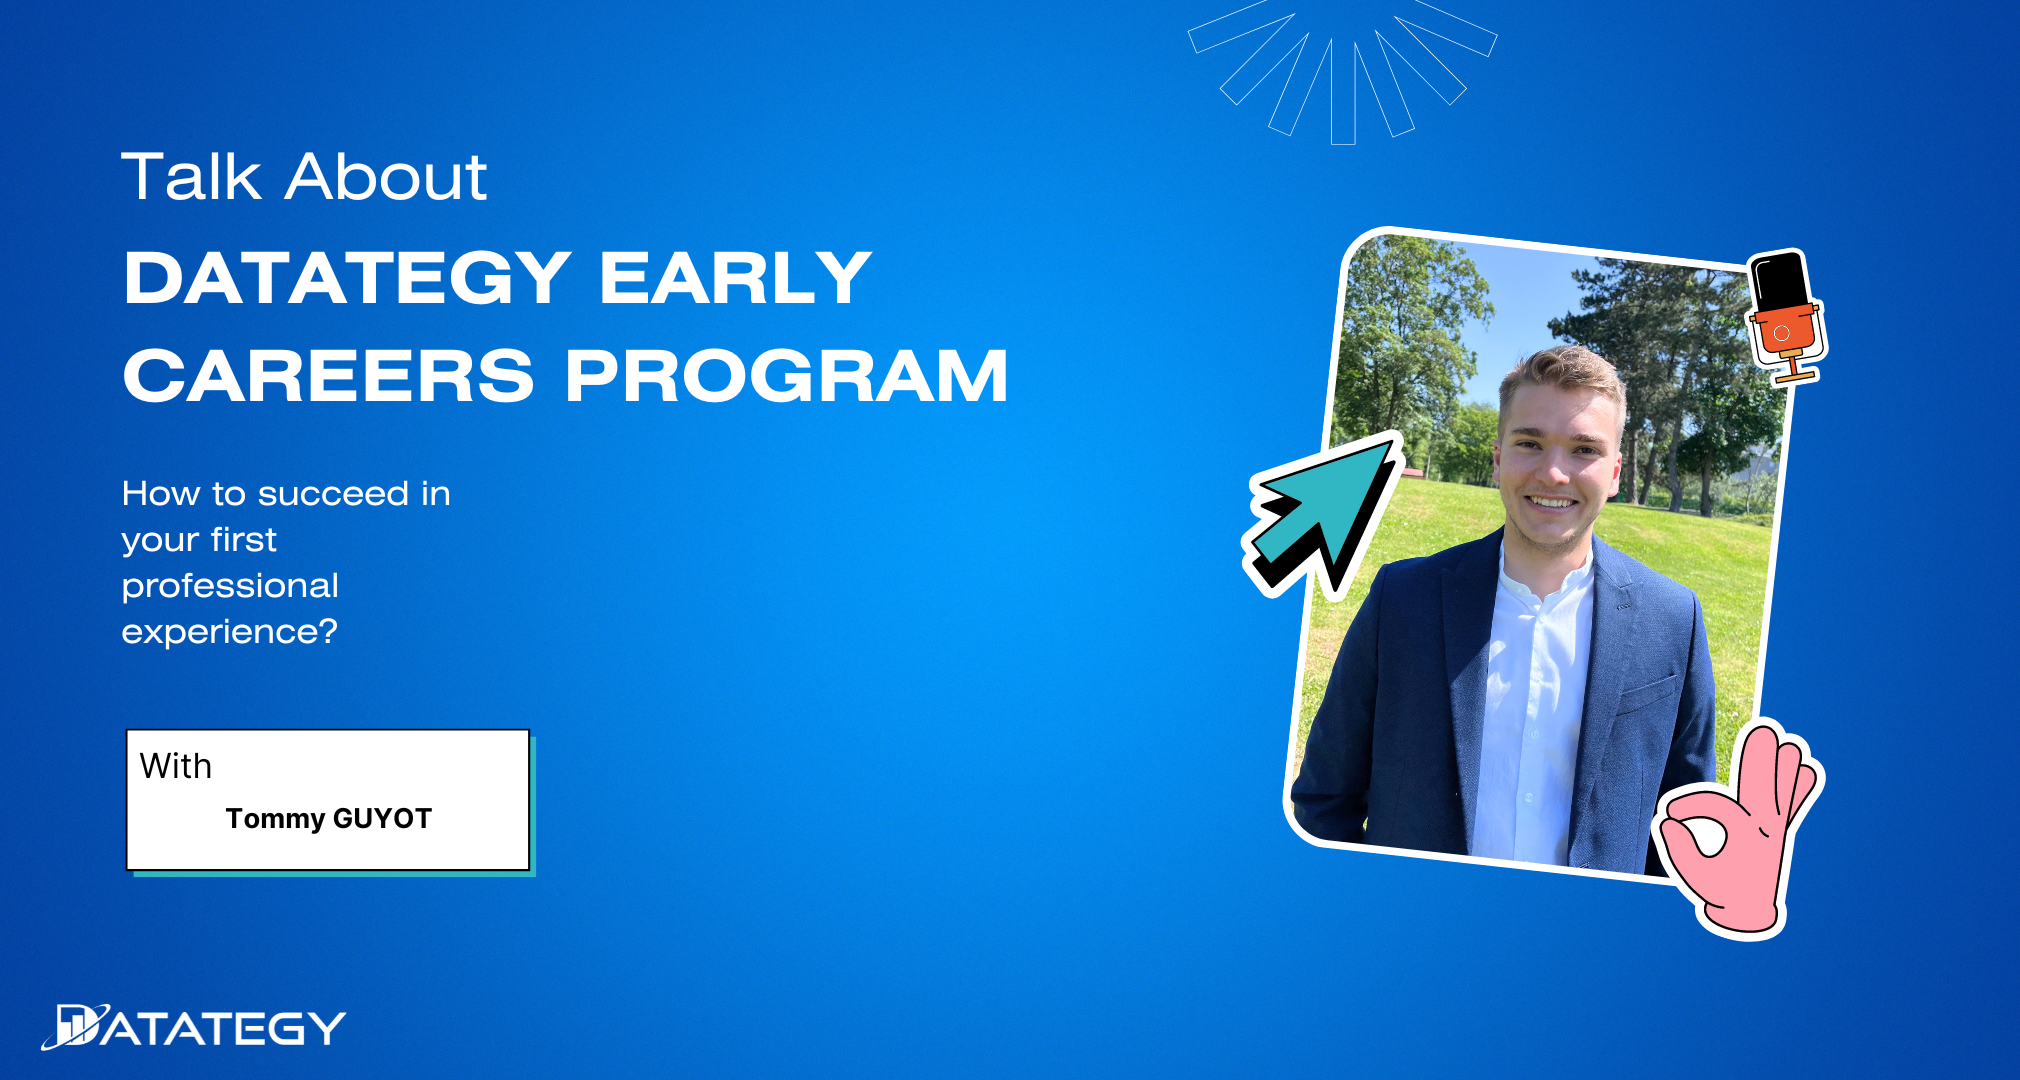 “DATATEGY EARLY CAREERS PROGRAM” With Tommy GUYOT